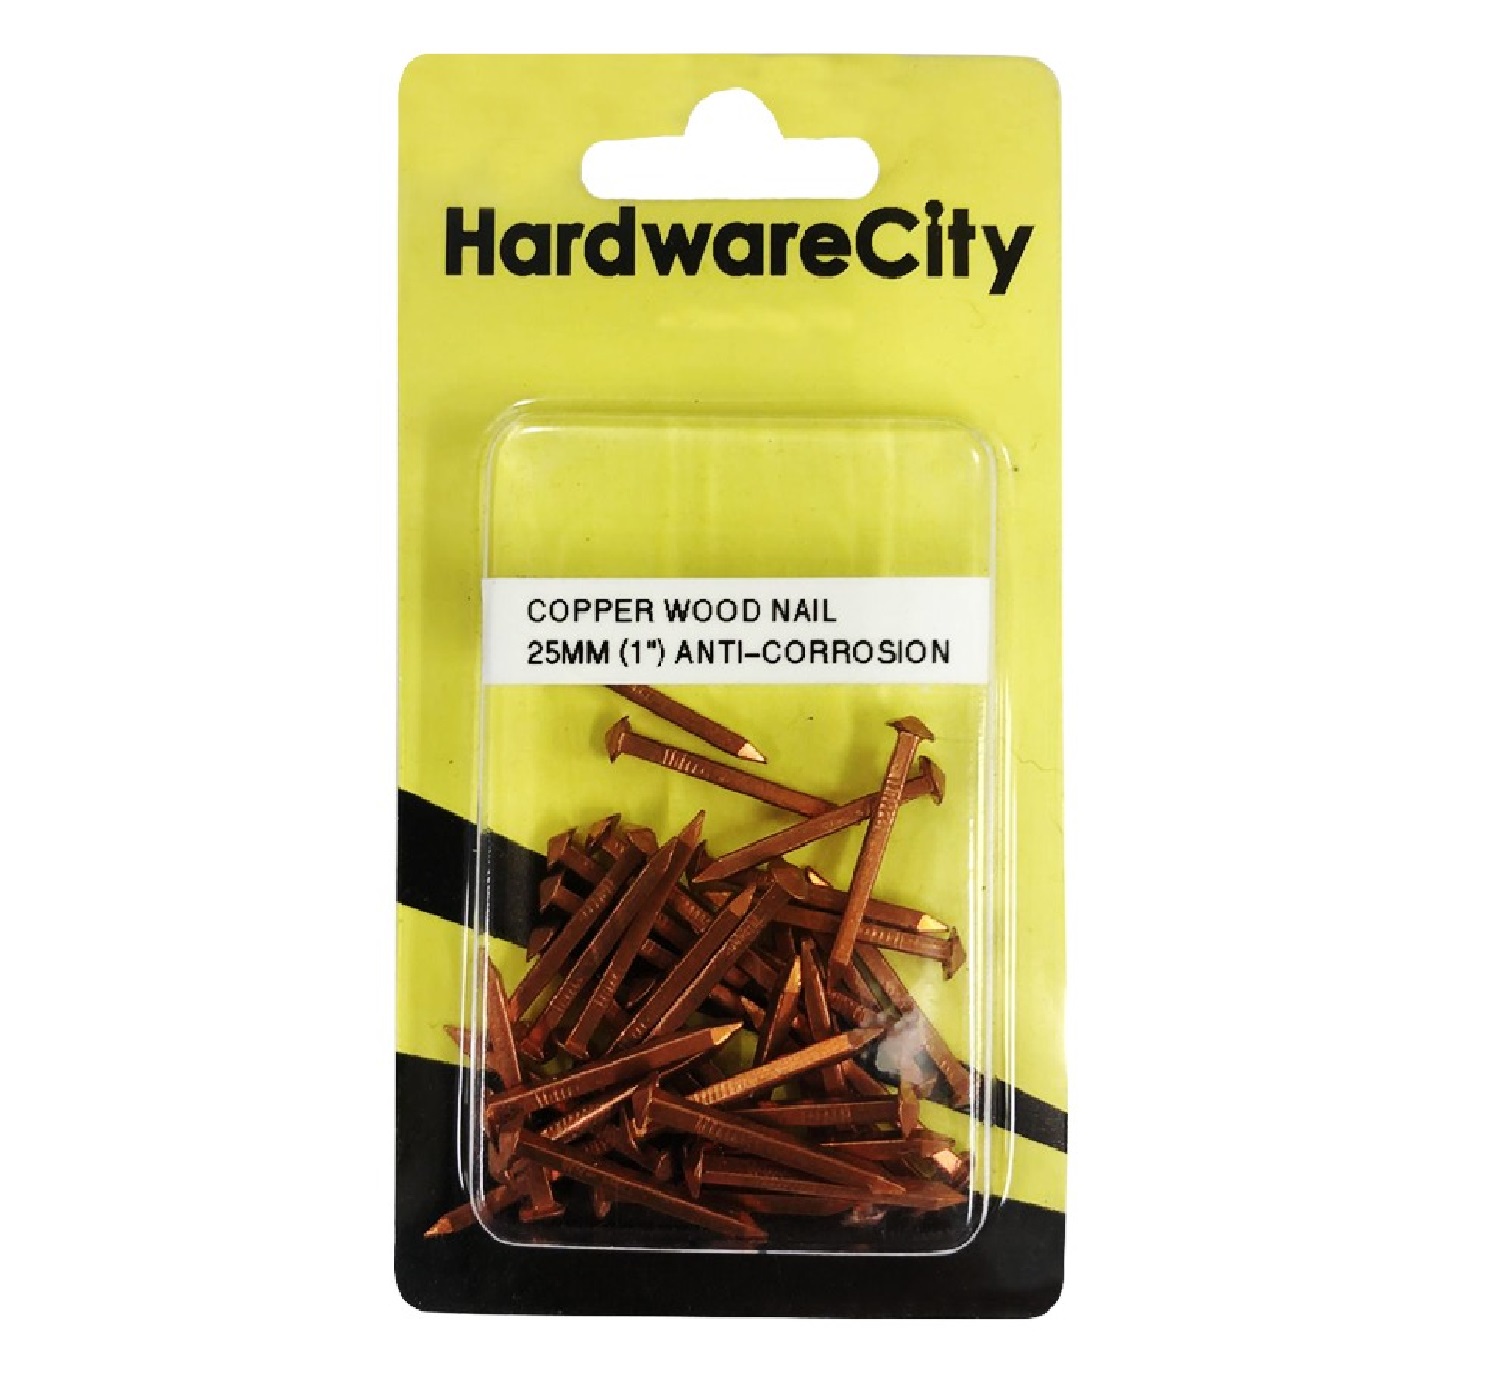 HardwareCity 25MM (1") Copper Wood Nails For Roofing & Furniture Repairs, 20PC/Pair